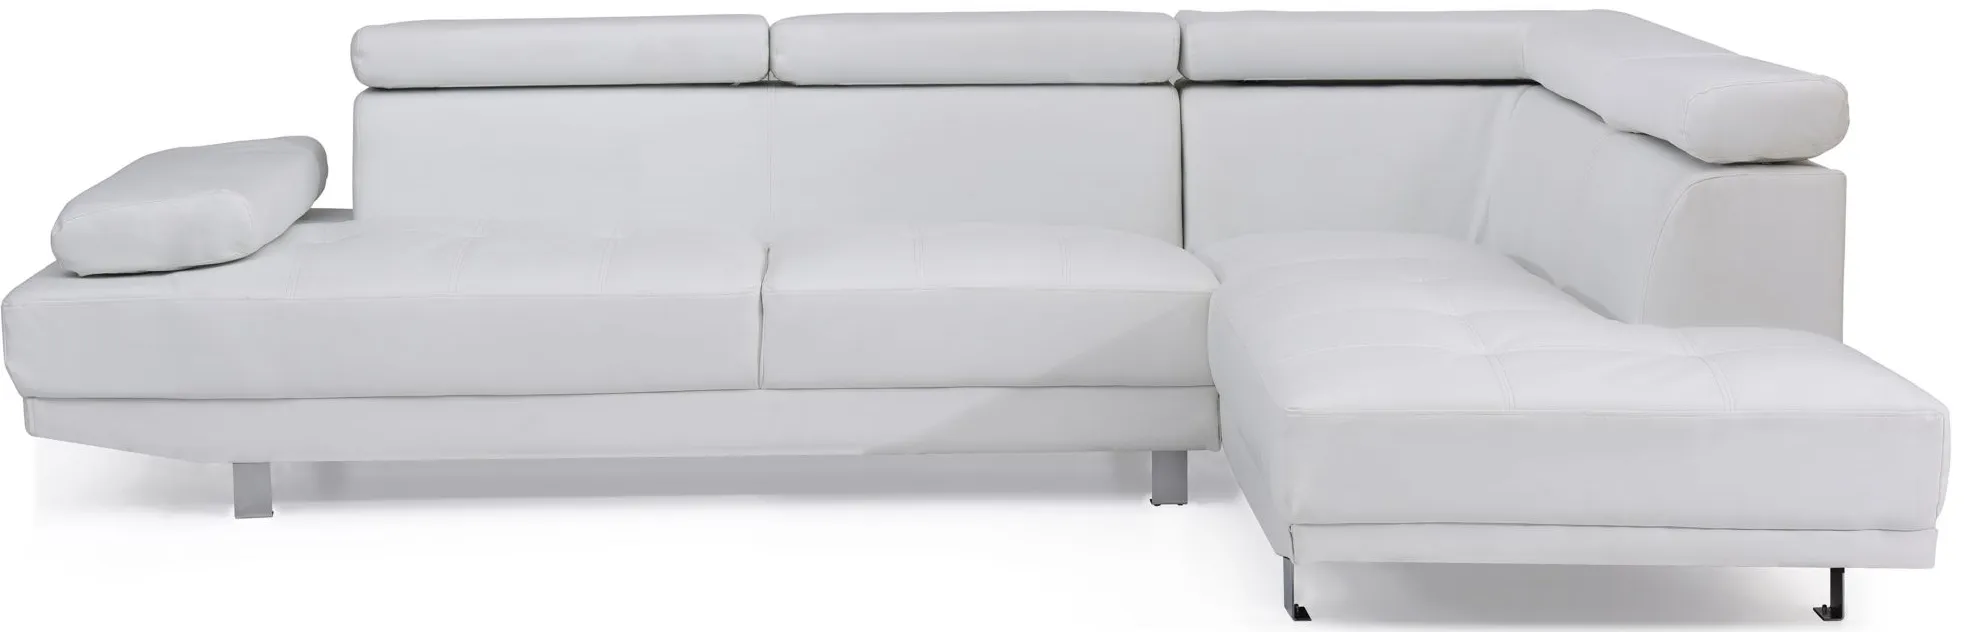 Riveredge 2-pc. Sectional Sofa in White by Glory Furniture